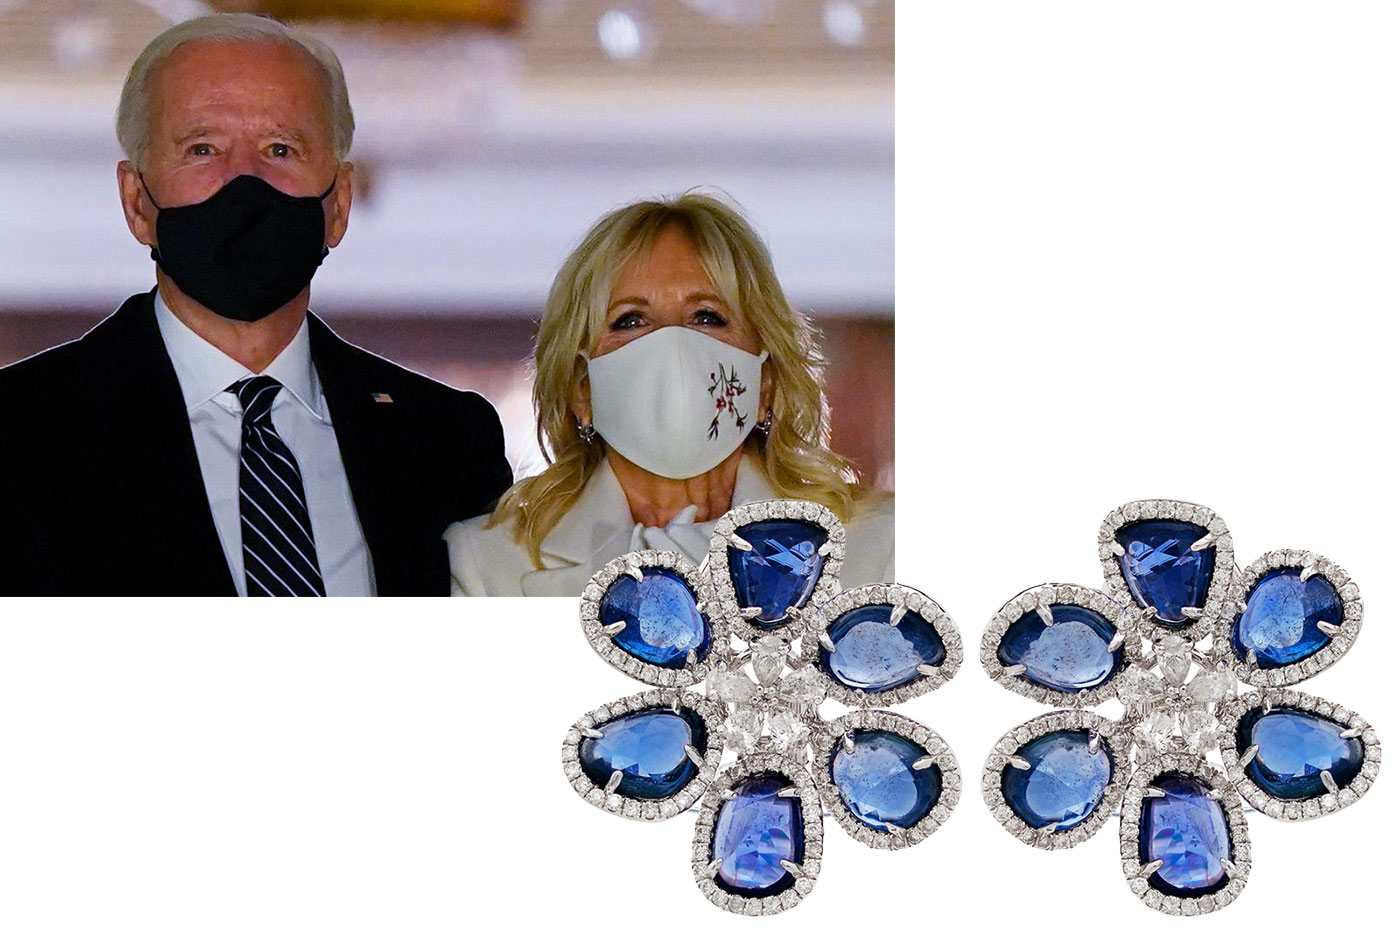 First Lady of the United States, Dr. Jill Biden, wearing the Ruchi New York Desert Bloom Mariposa earrings with 9.08 carats of blue sapphires and 1.56 carats of diamonds to her husband’s Presidential Inauguration in January 2021